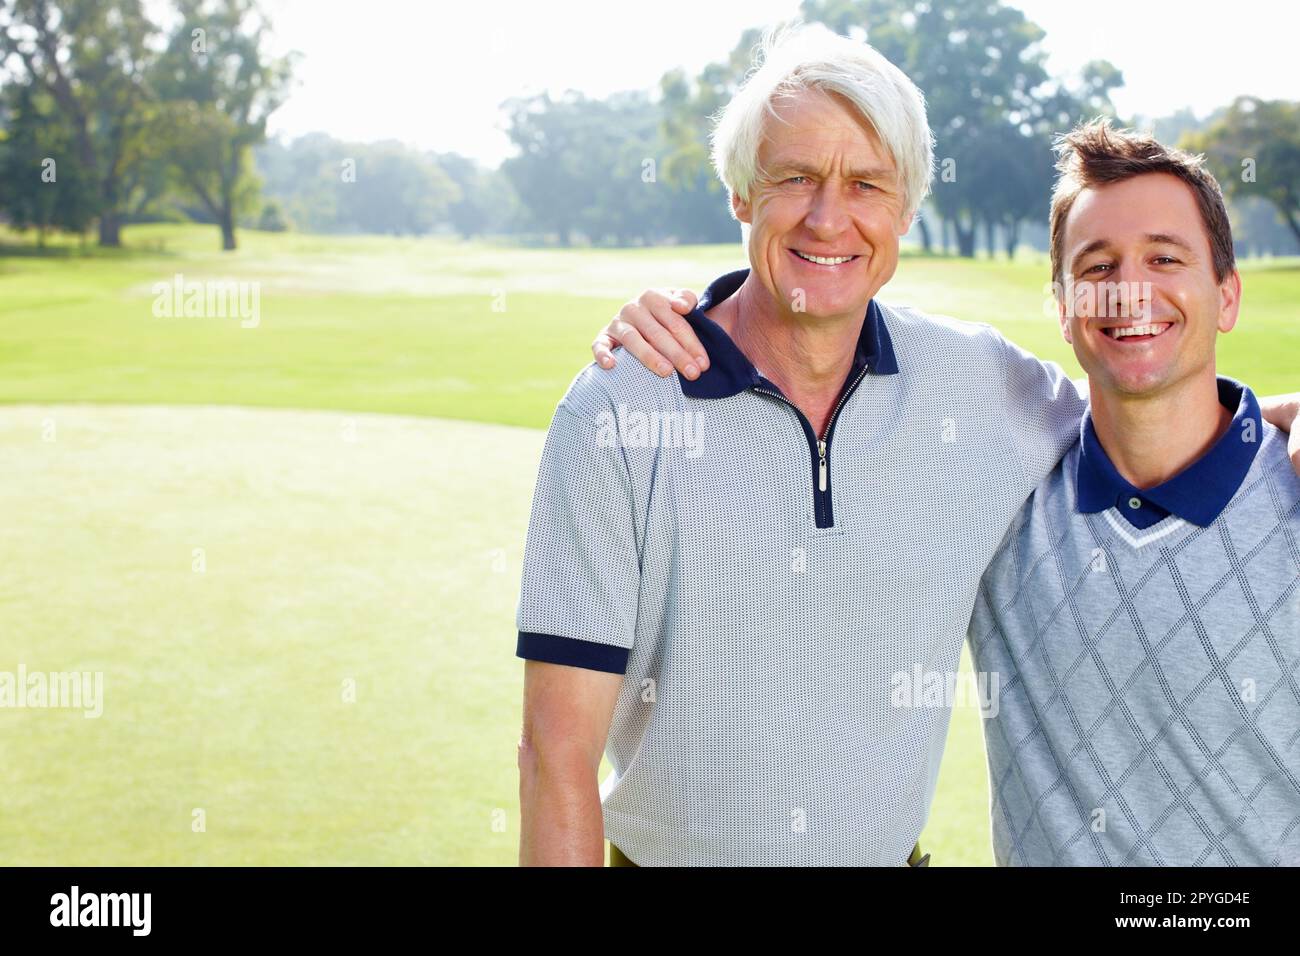 Father and son smiling. Portrait of father and son on the golf course standing with arms around and smiling. Stock Photo